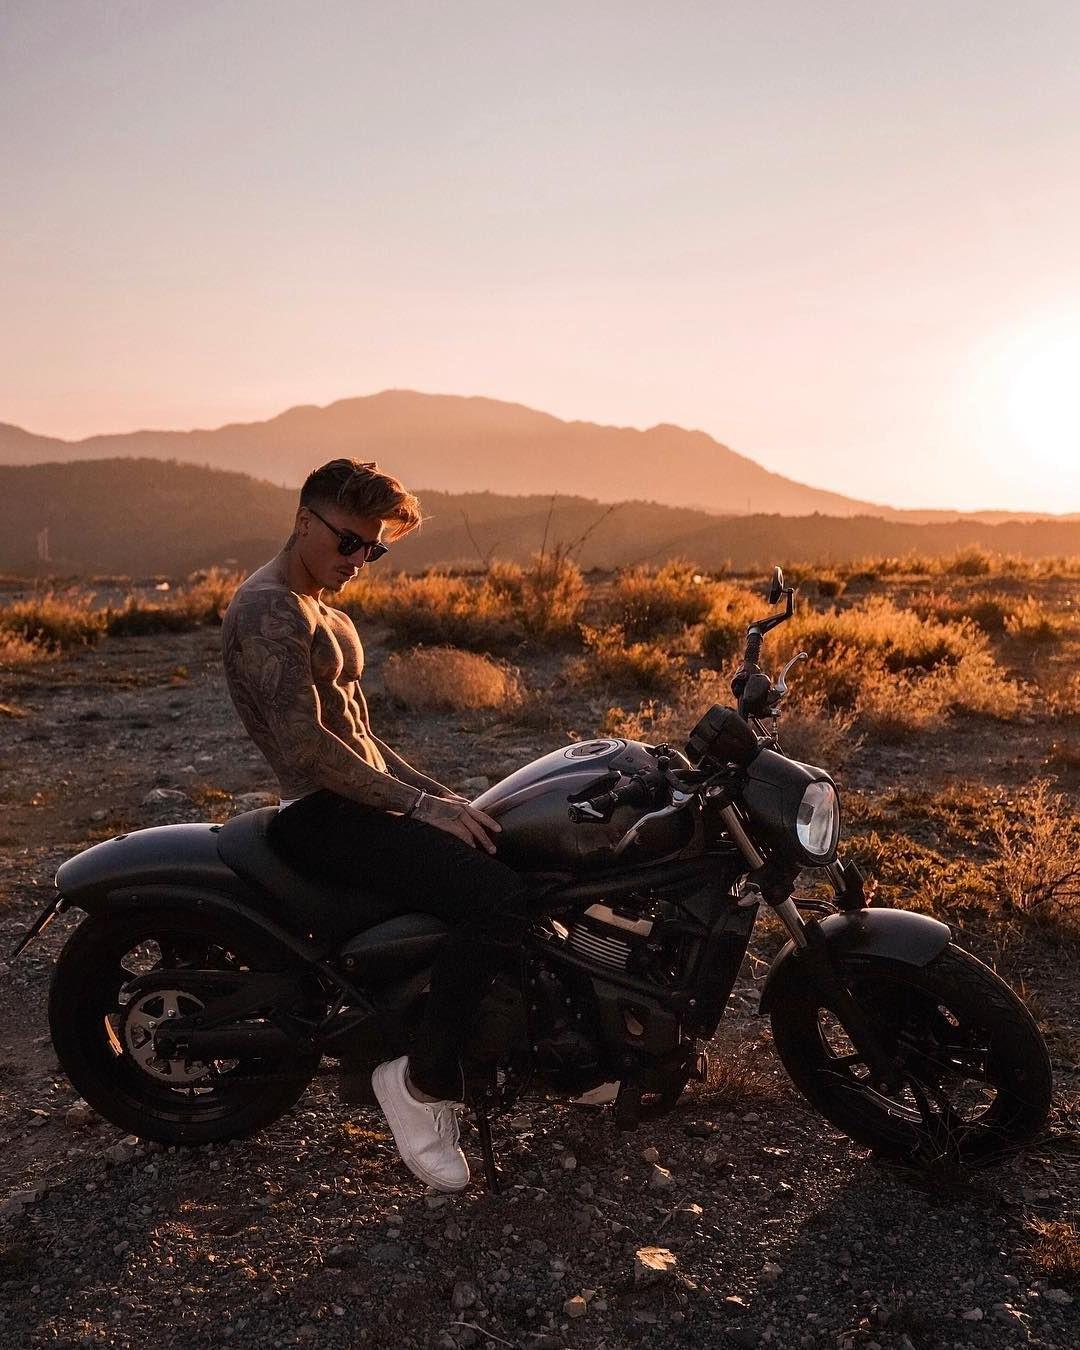 shirtless-muscle-abs-pecs-sunglasses-desert-motorcycle-johnny-edlind